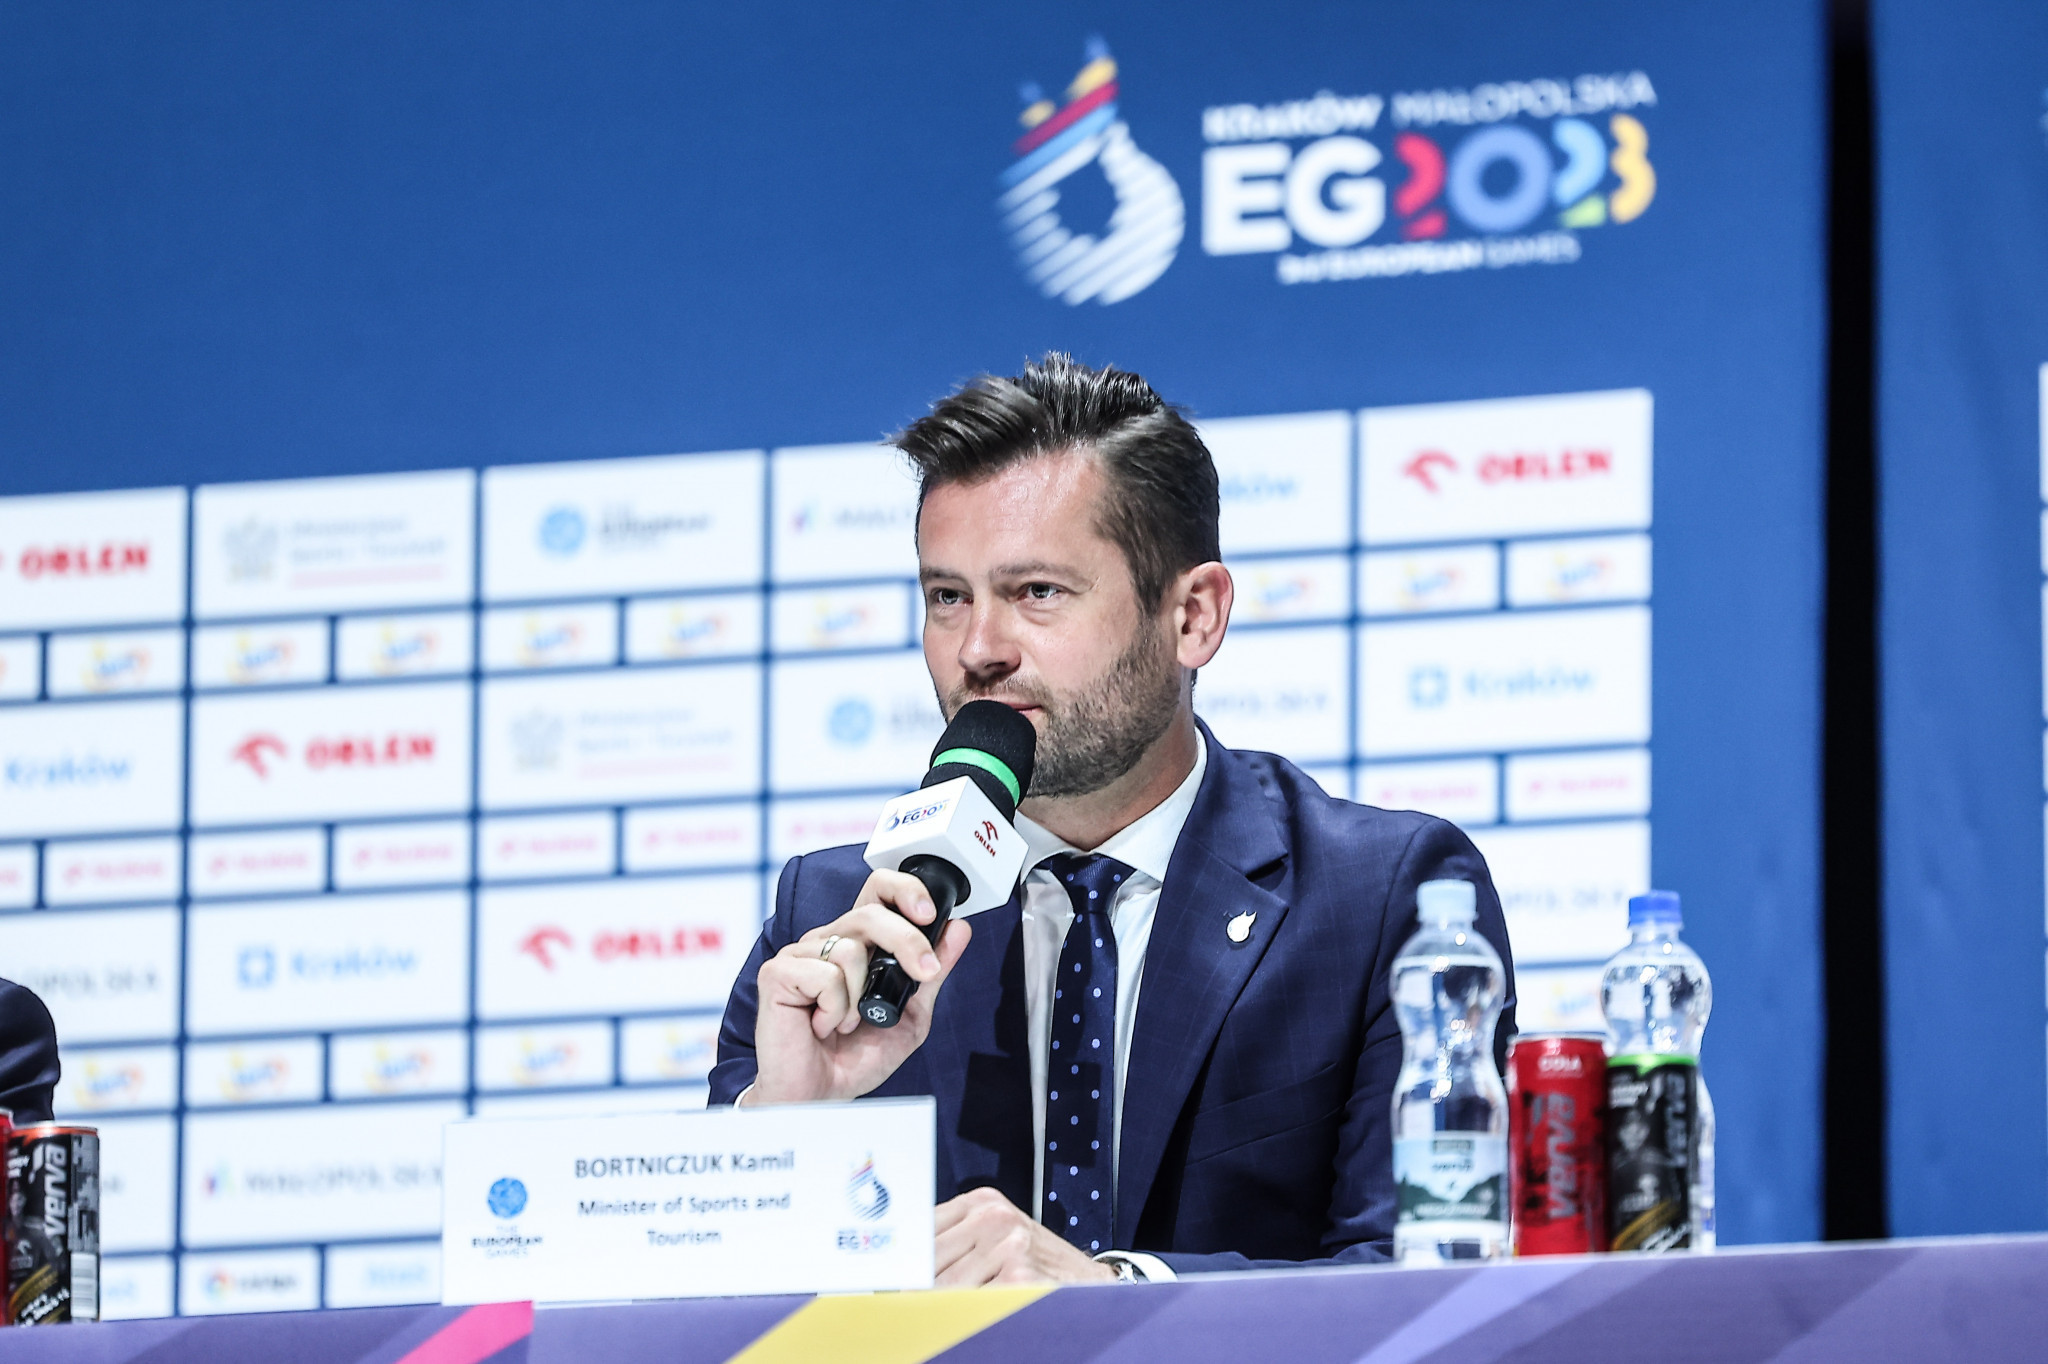 Kamil Bortniczuk, Poland's Minister of Sports and Tourism, praised the steadfastness shown in banning Russian and Belarusian athletes from the recently concluded Kraków-Małopolska 2023 European Games ©Kraków-Małopolska 2023